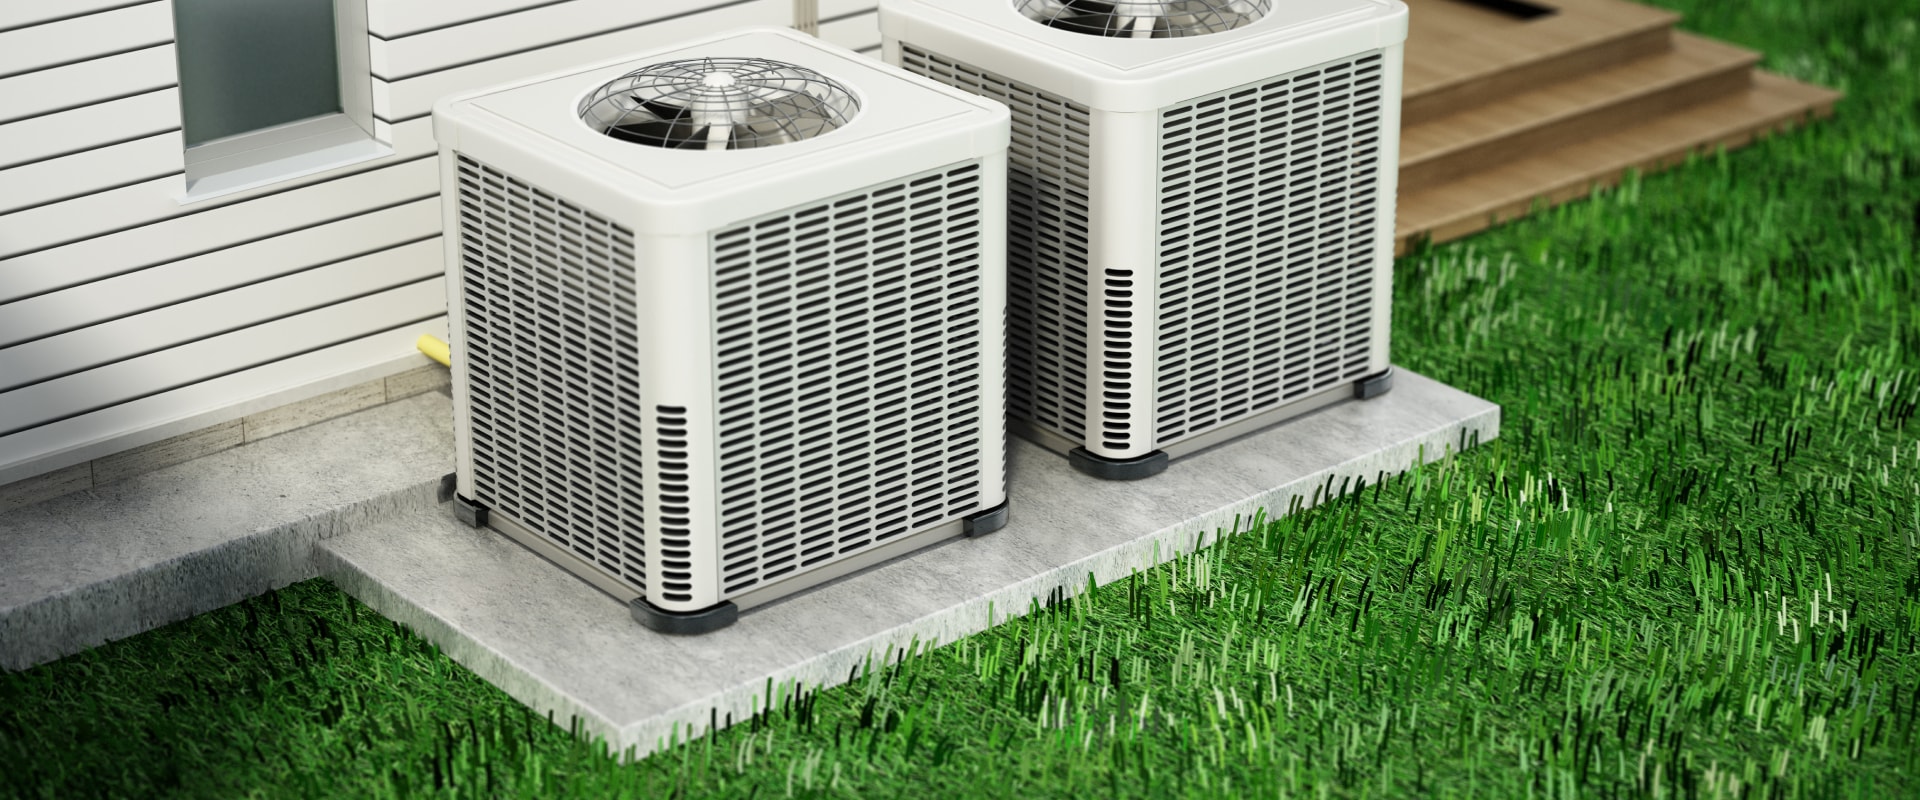 How big is the hvac market in the us?